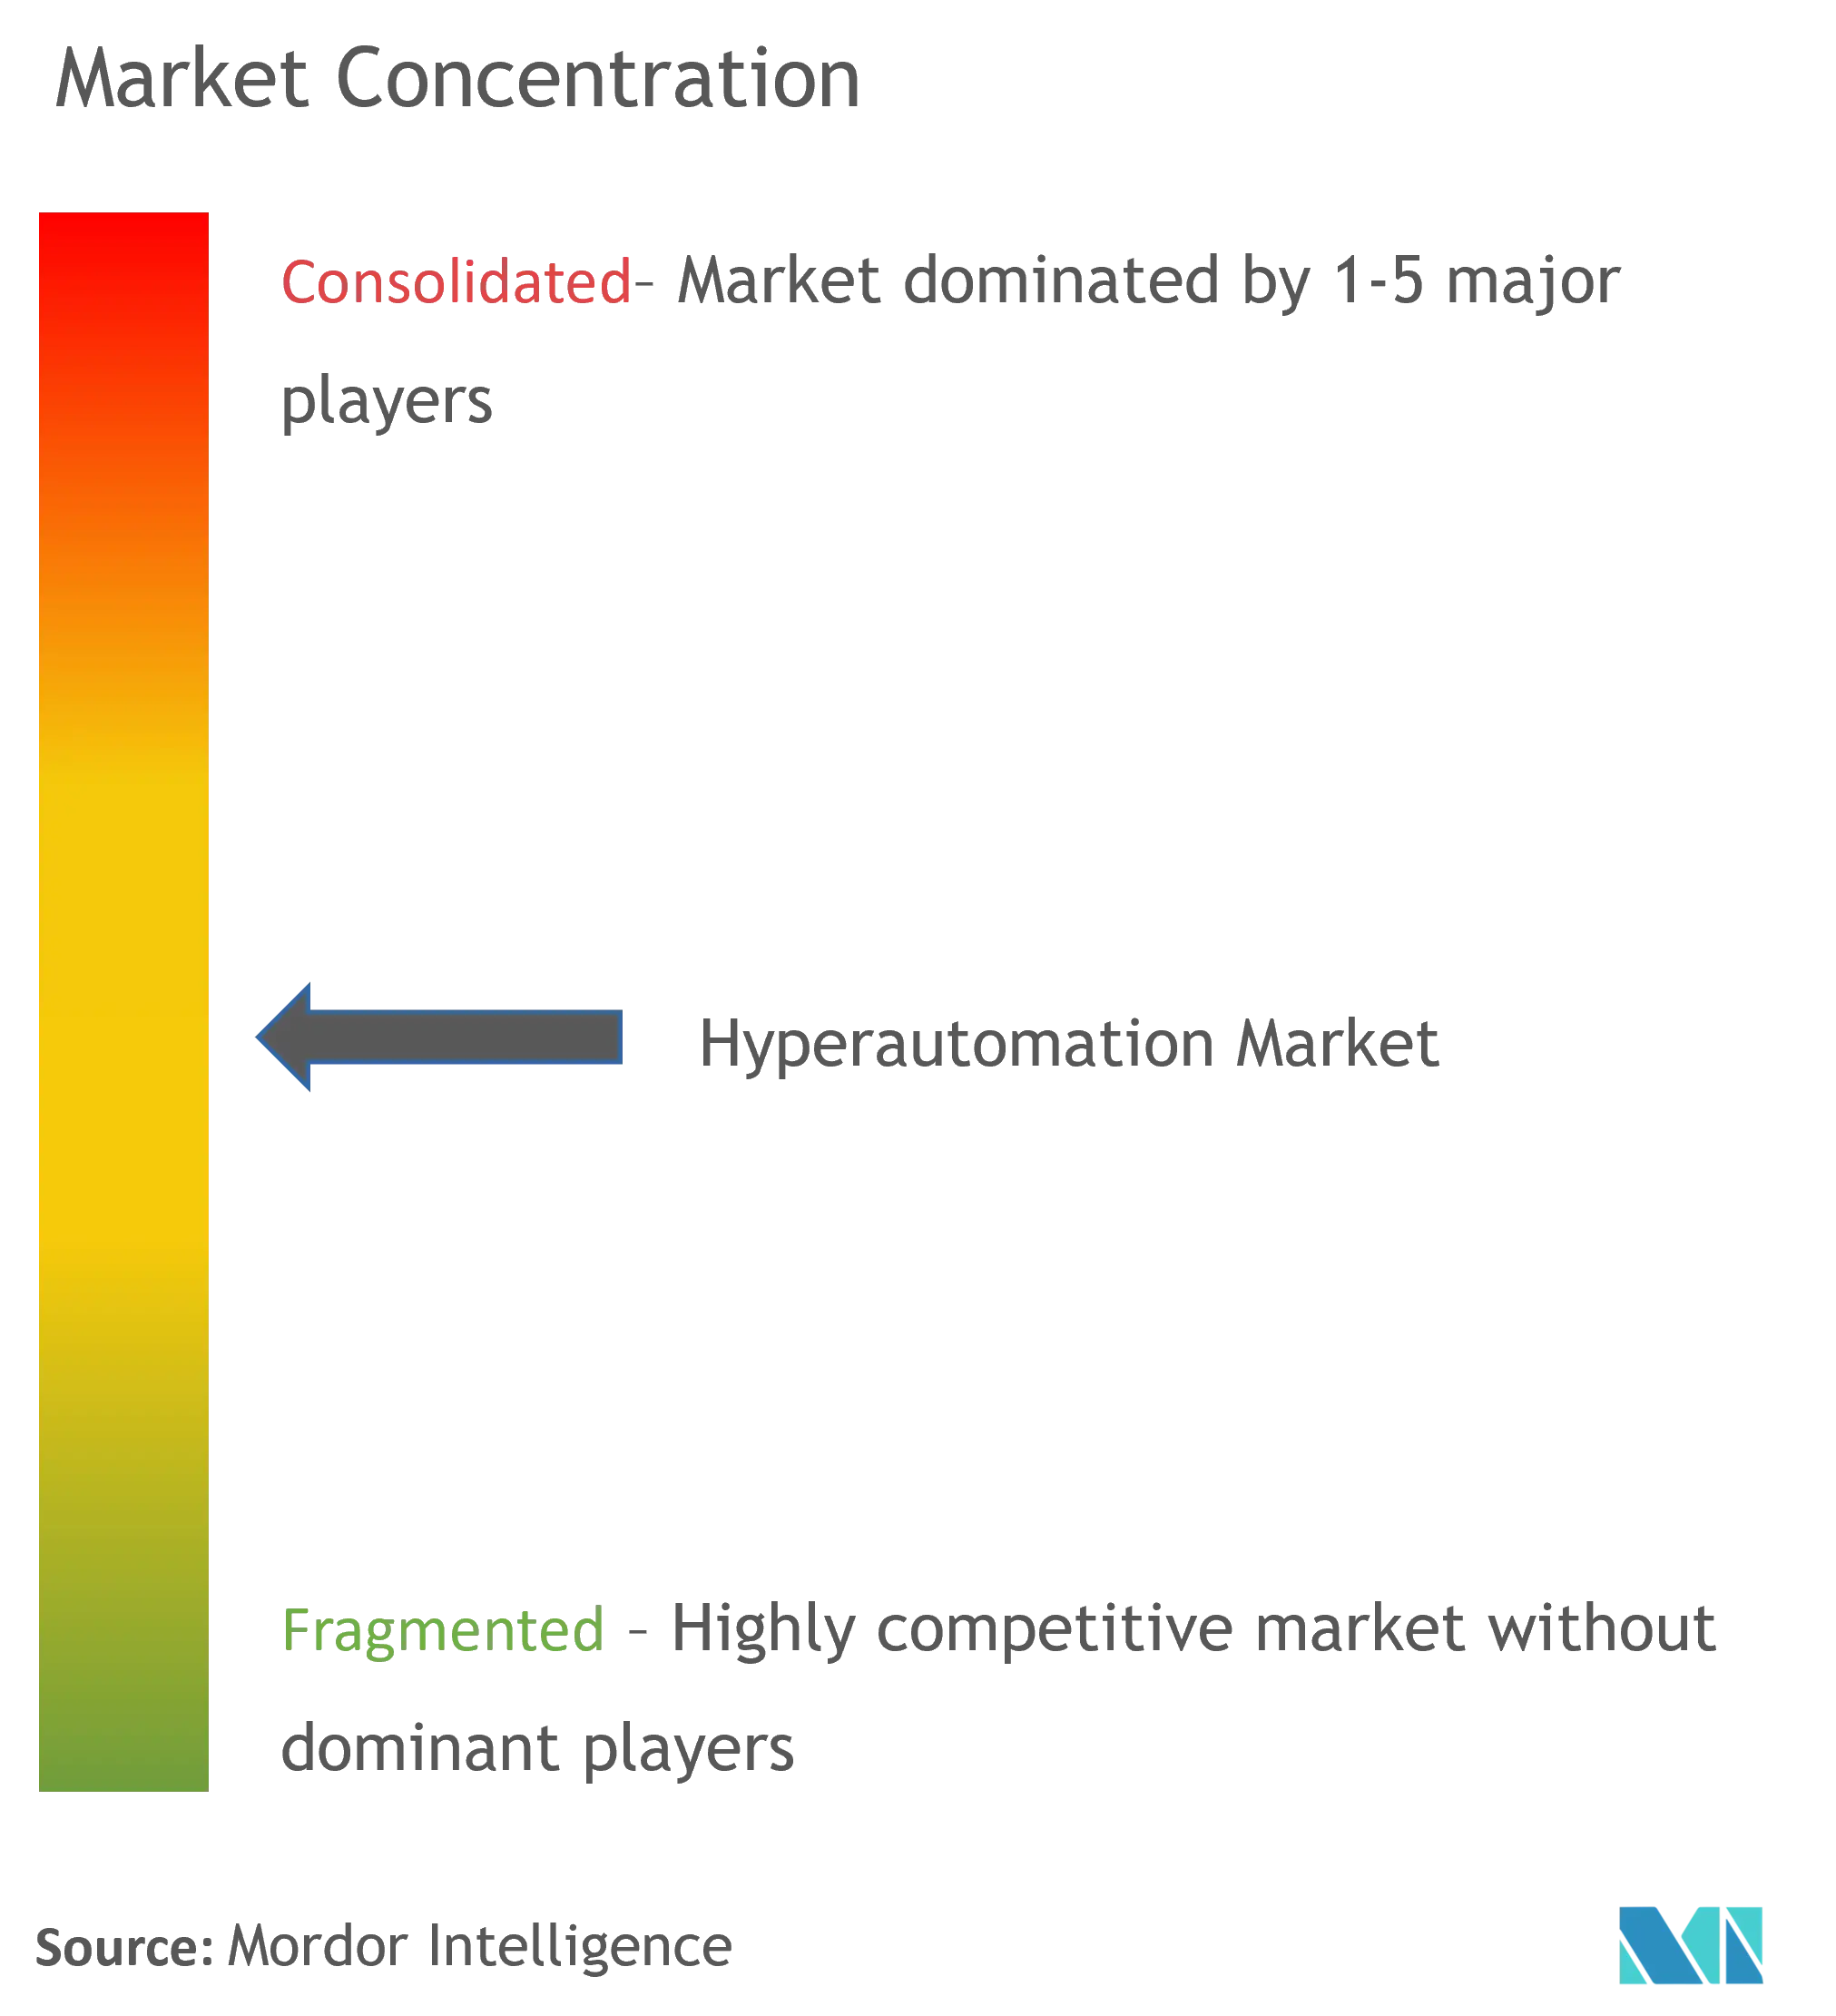 Hyperautomation Market Concentration